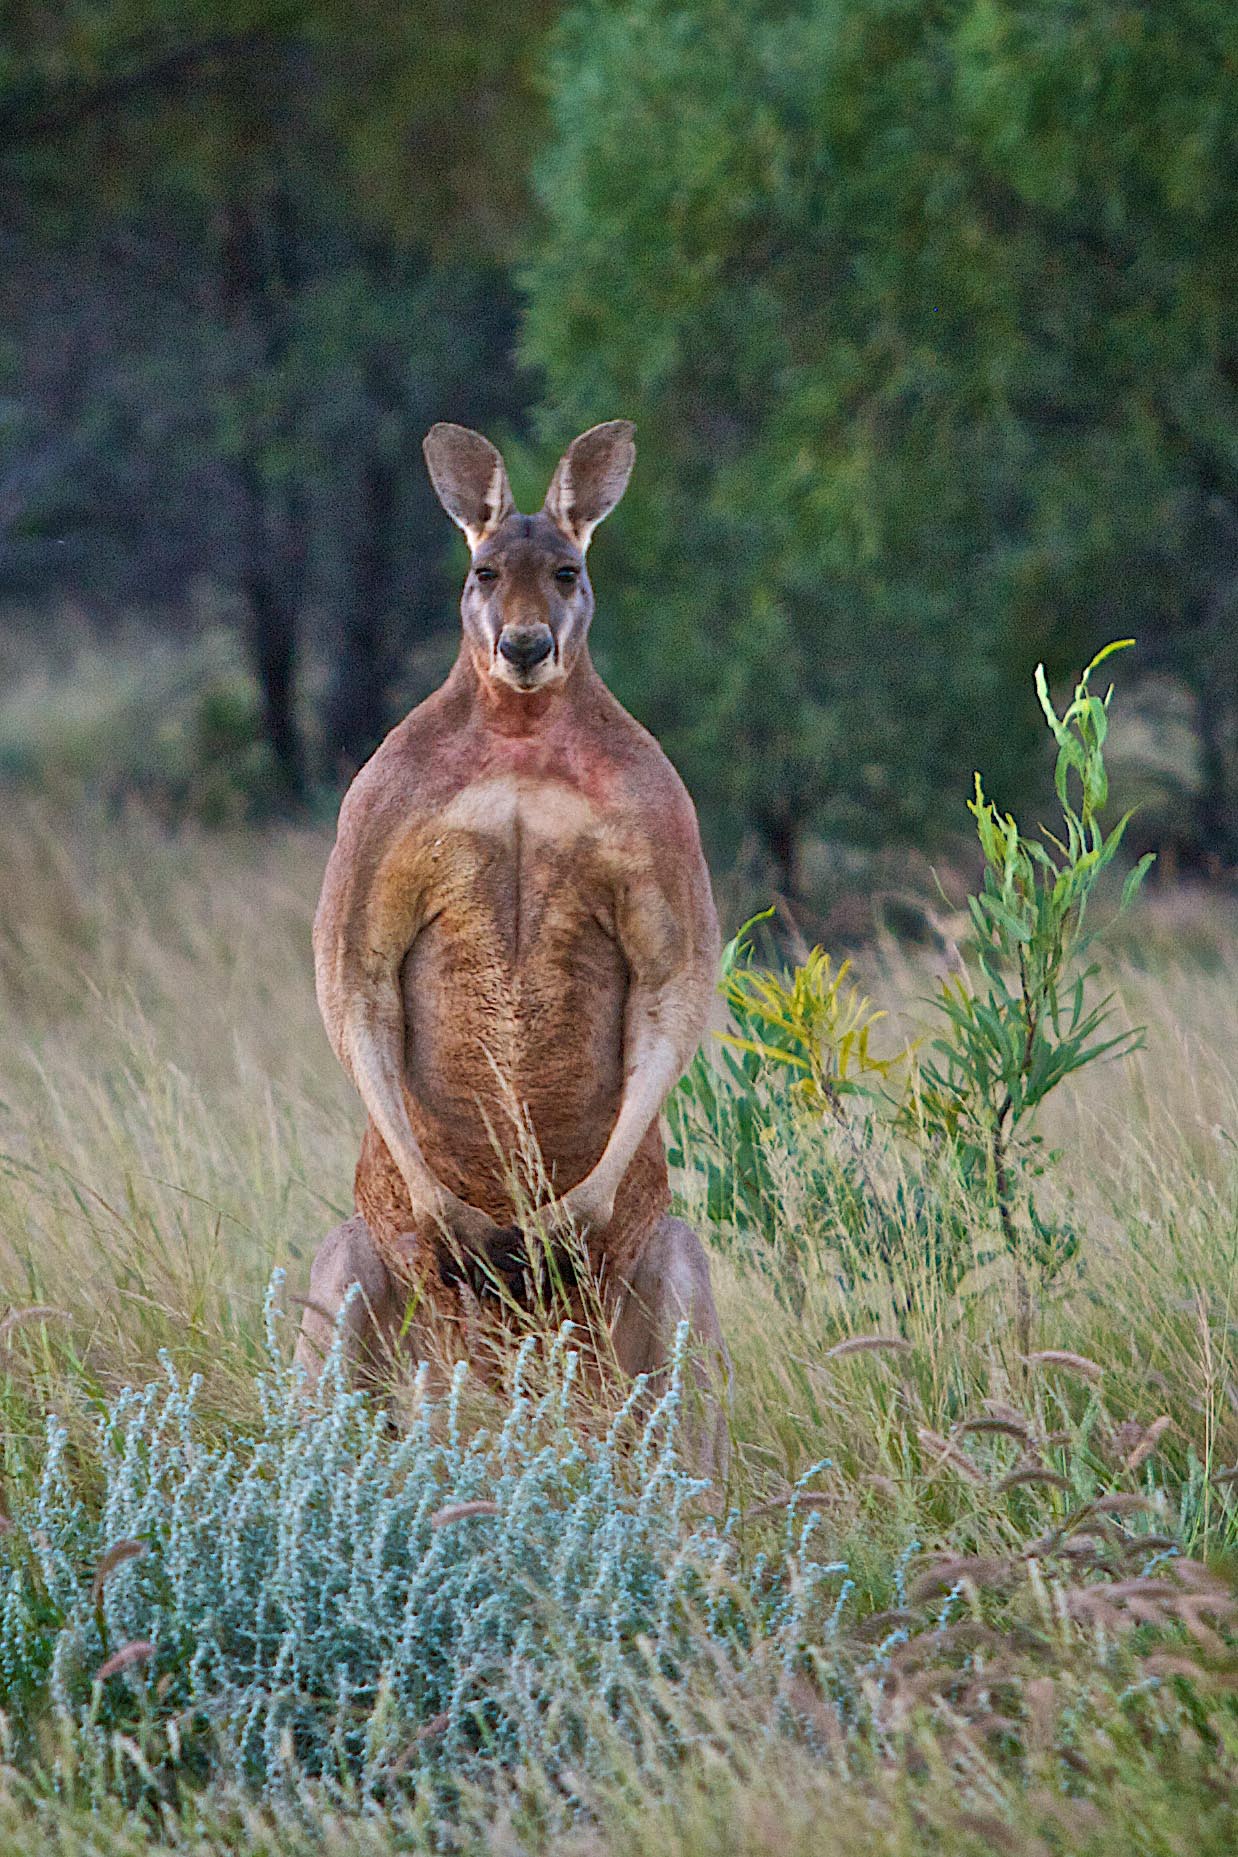 The male Red Kangaroo is the largest native animal in the Outback and the world’s largest marsupial, growing up to 1.4 metres tall. It is well adapted to hot dry conditions where rainfall is less than 500mm per year.